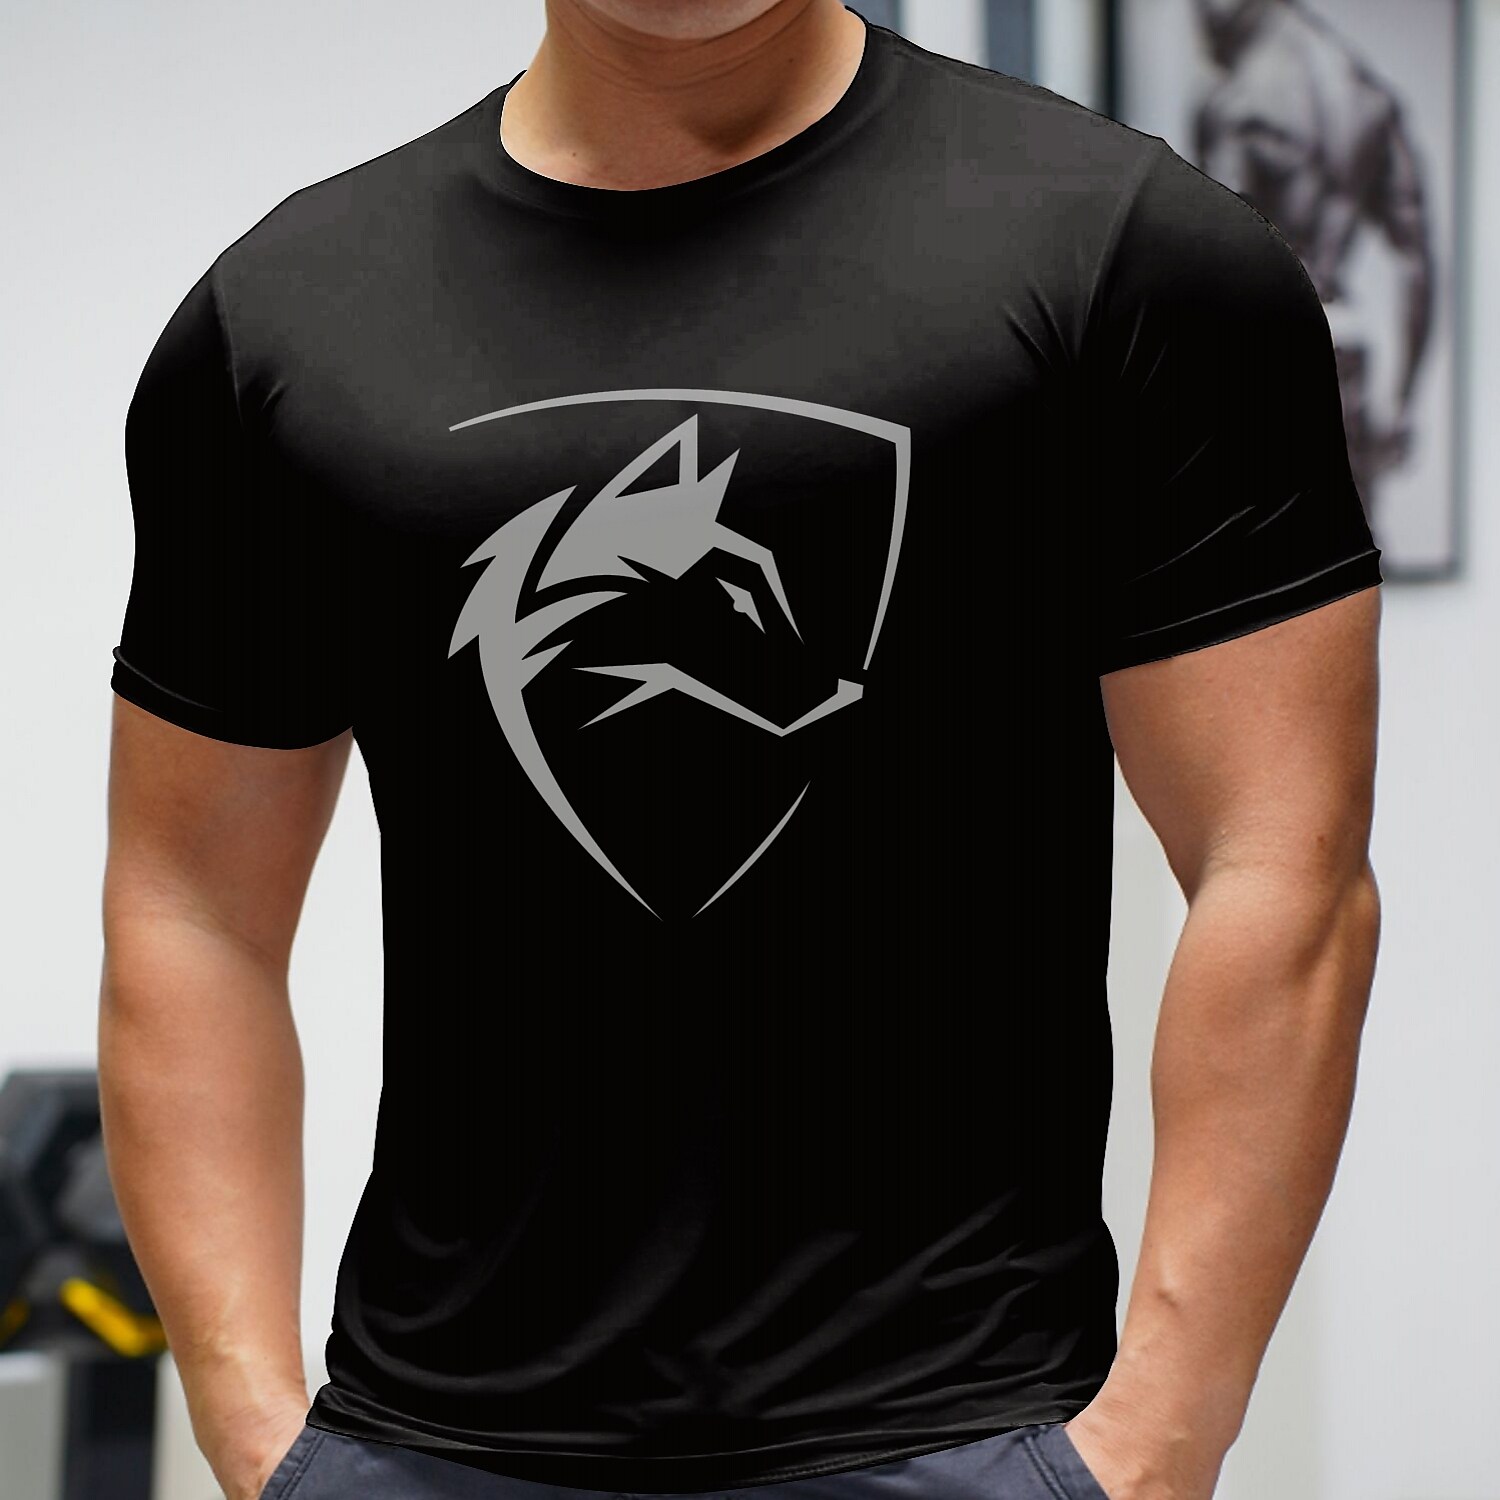 Men's Workout Running Shirt Short Sleeve Tee Athletic Athleisure Breathable Moisture Wicking Soft Fitness Gym Sportswear 